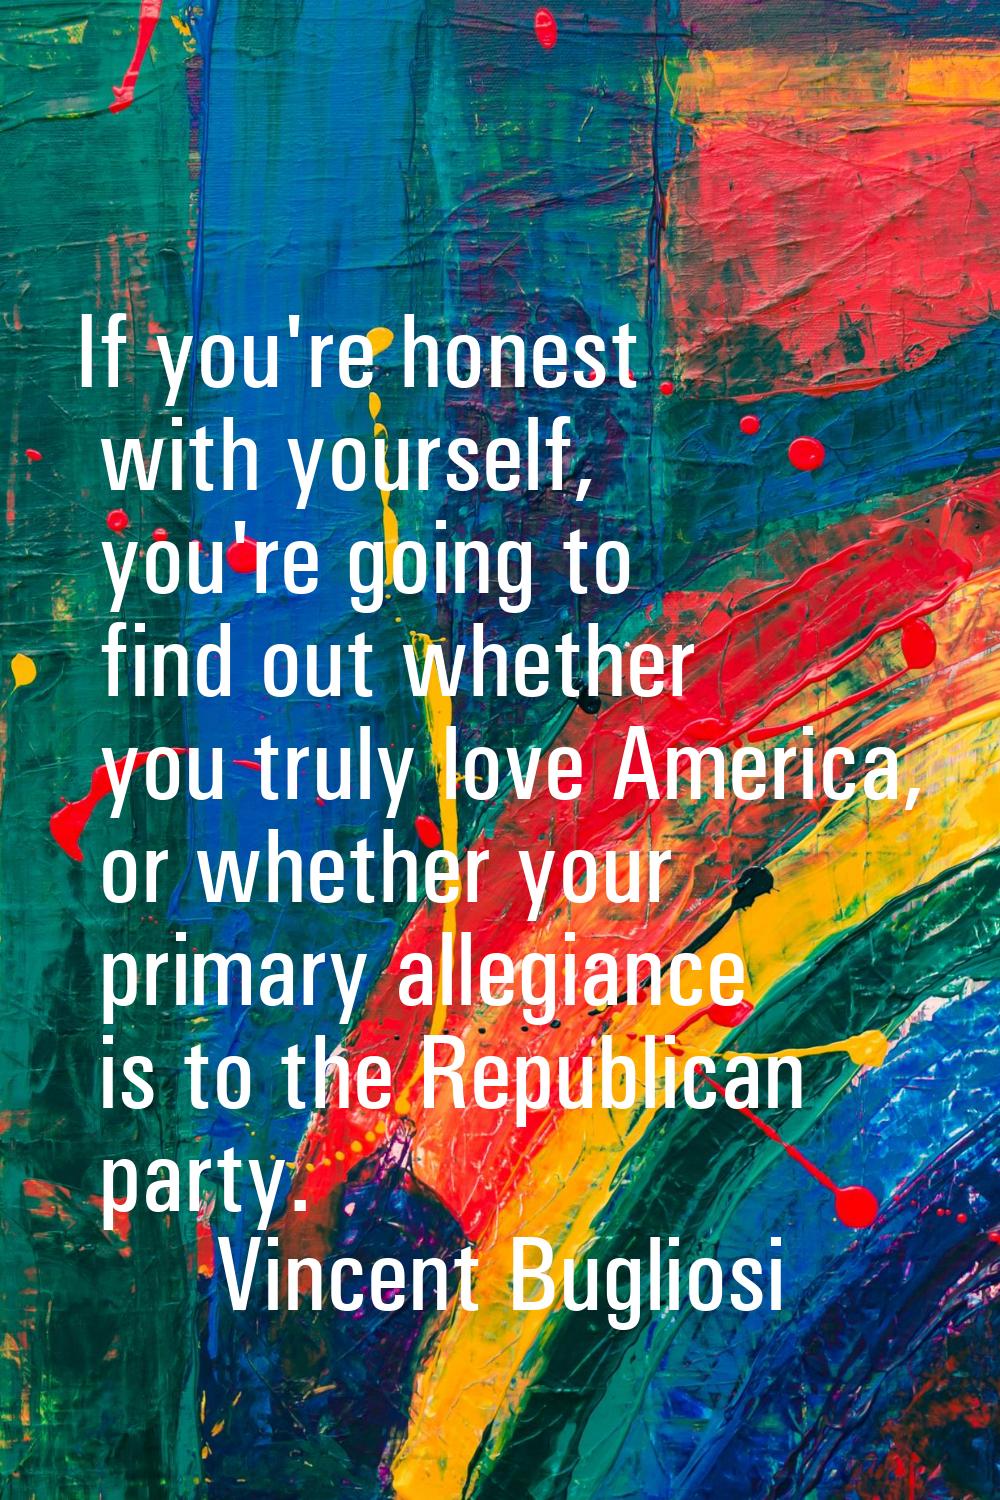 If you're honest with yourself, you're going to find out whether you truly love America, or whether